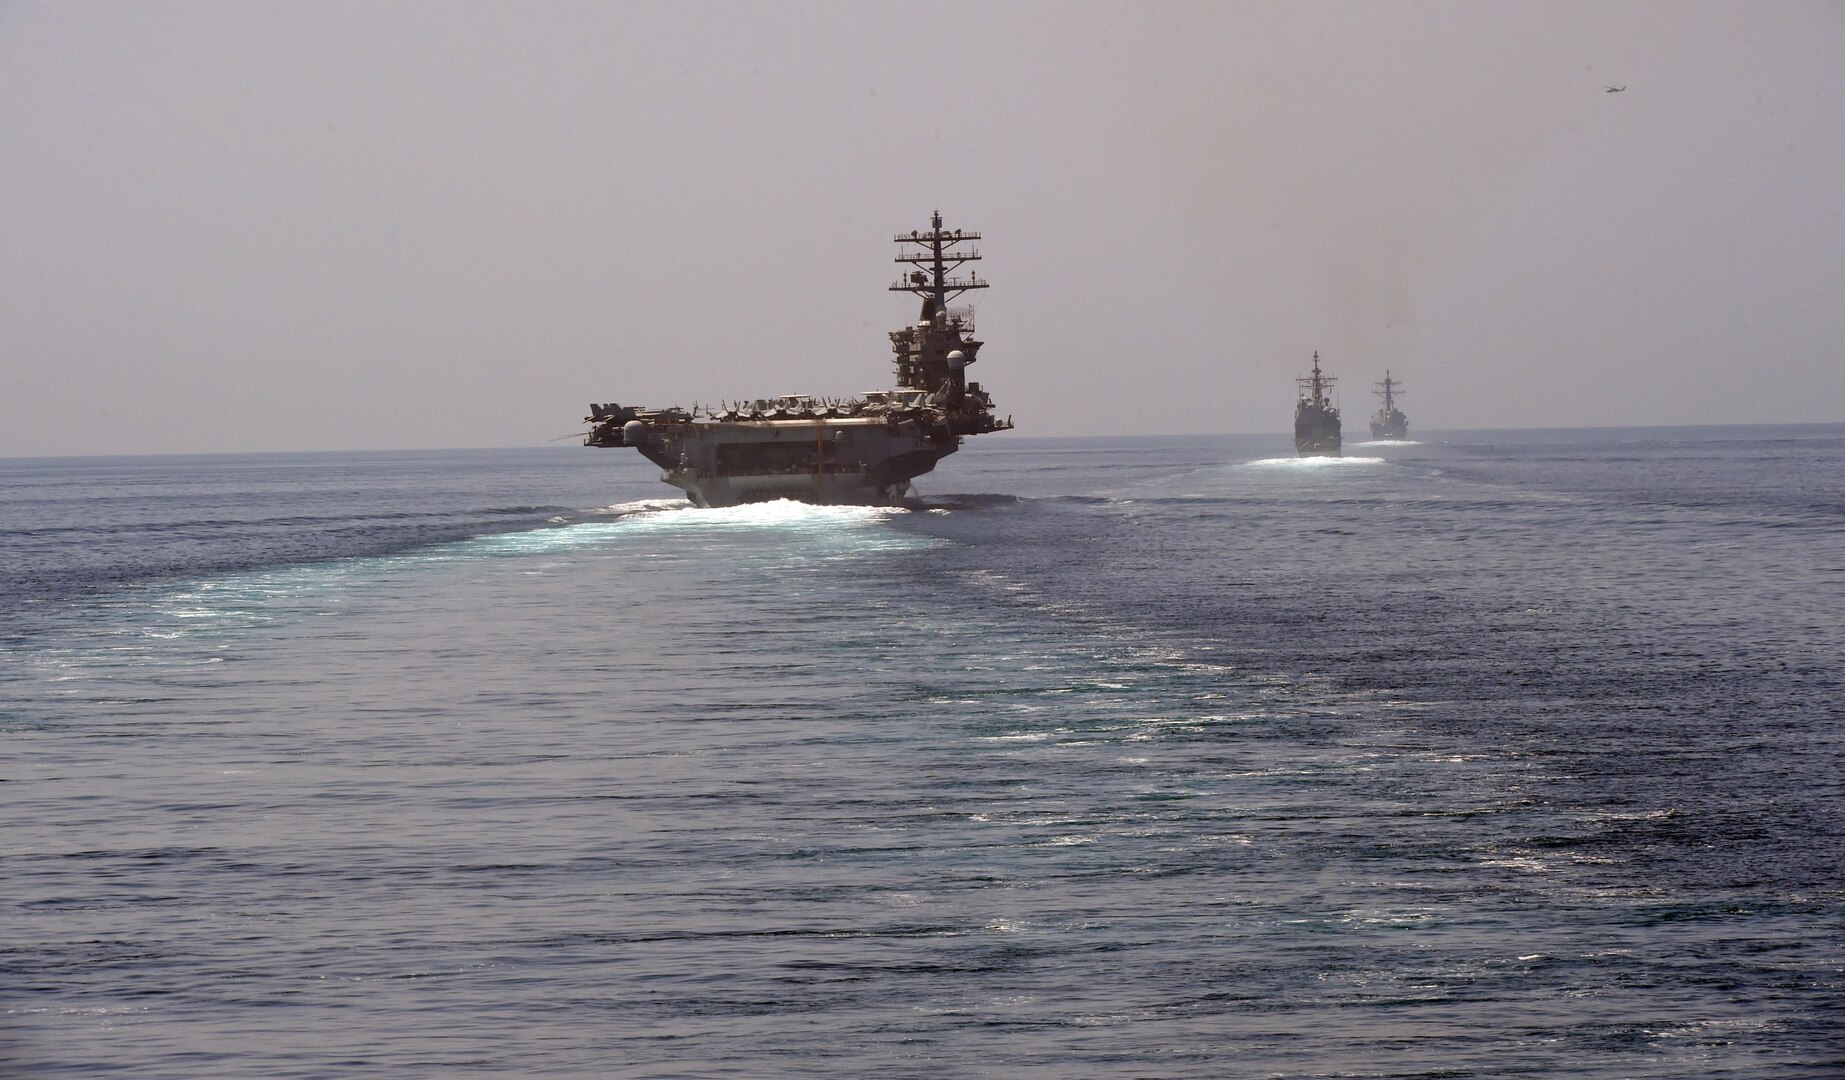 200918-N-IE405-1060 STRAIT OF HORMUZ (Sep. 18, 2020) The aircraft carrier USS Nimitz (CVN 68), guided-missile cruiser USS Princeton (CG 59) and guided-missile destroyer USS Sterett (DDG 104) steam in formation during a Strait of Hormuz transit, Sept. 18. The Nimitz Carrier Strike Group is deployed to the U.S. 5th Fleet area of operations in support of naval operations to ensure maritime stability and security in the Central Region, connecting the Mediterranean and the Pacific through the western Indian Ocean and three strategic chokepoints. (U.S. Navy photo by Mass Communication Specialist 2nd Class Indra Beaufort)